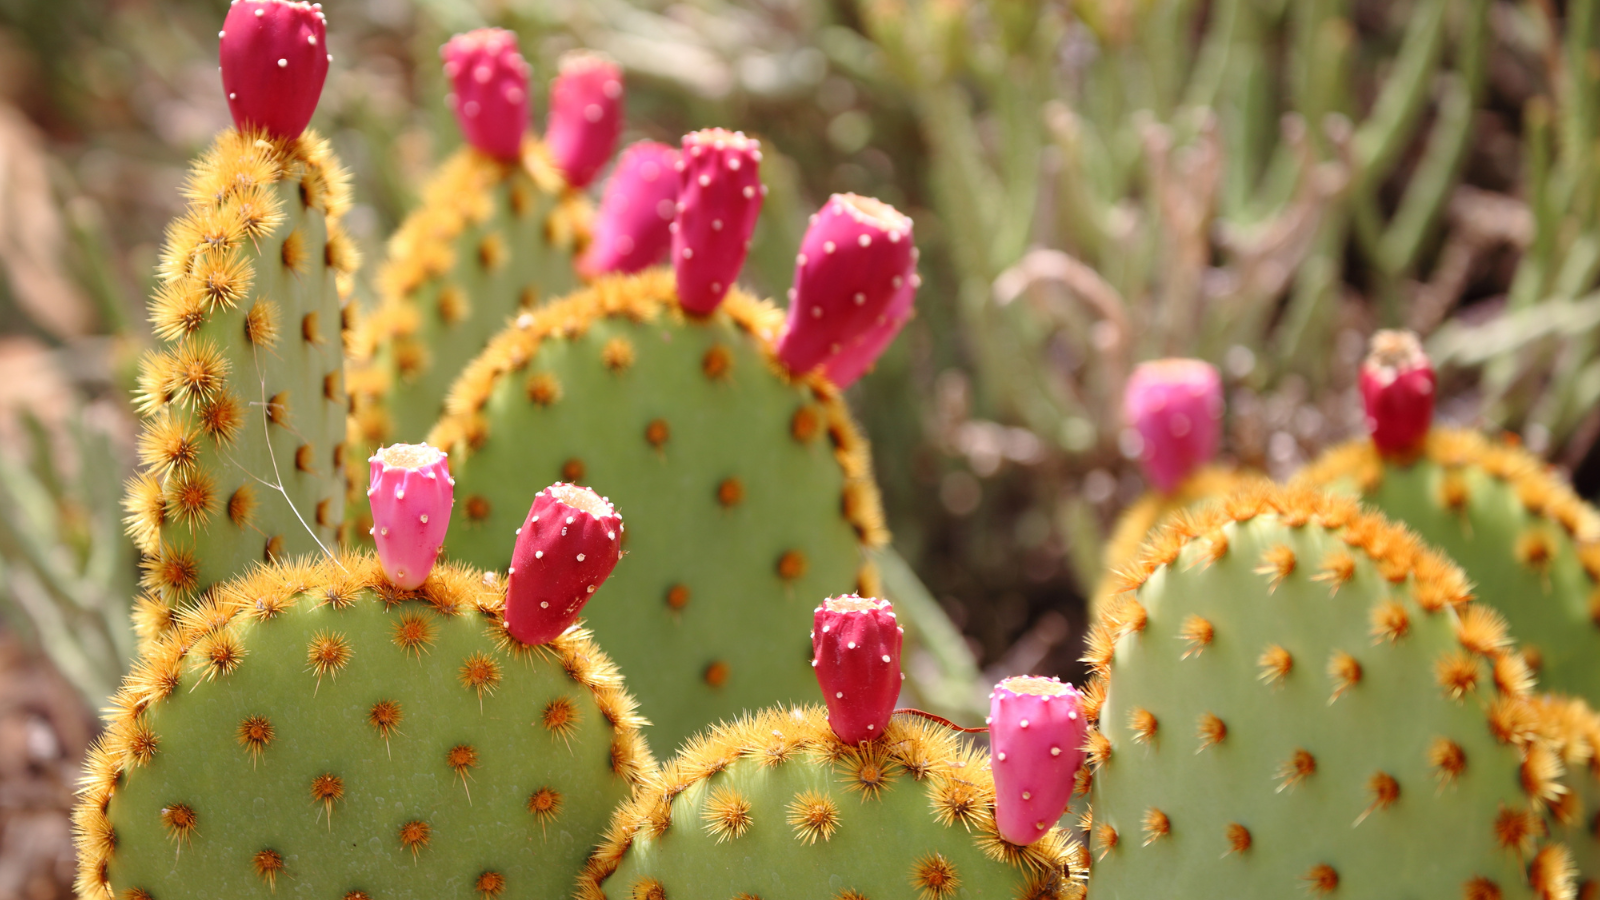 Prickly pear cactus in in bloom